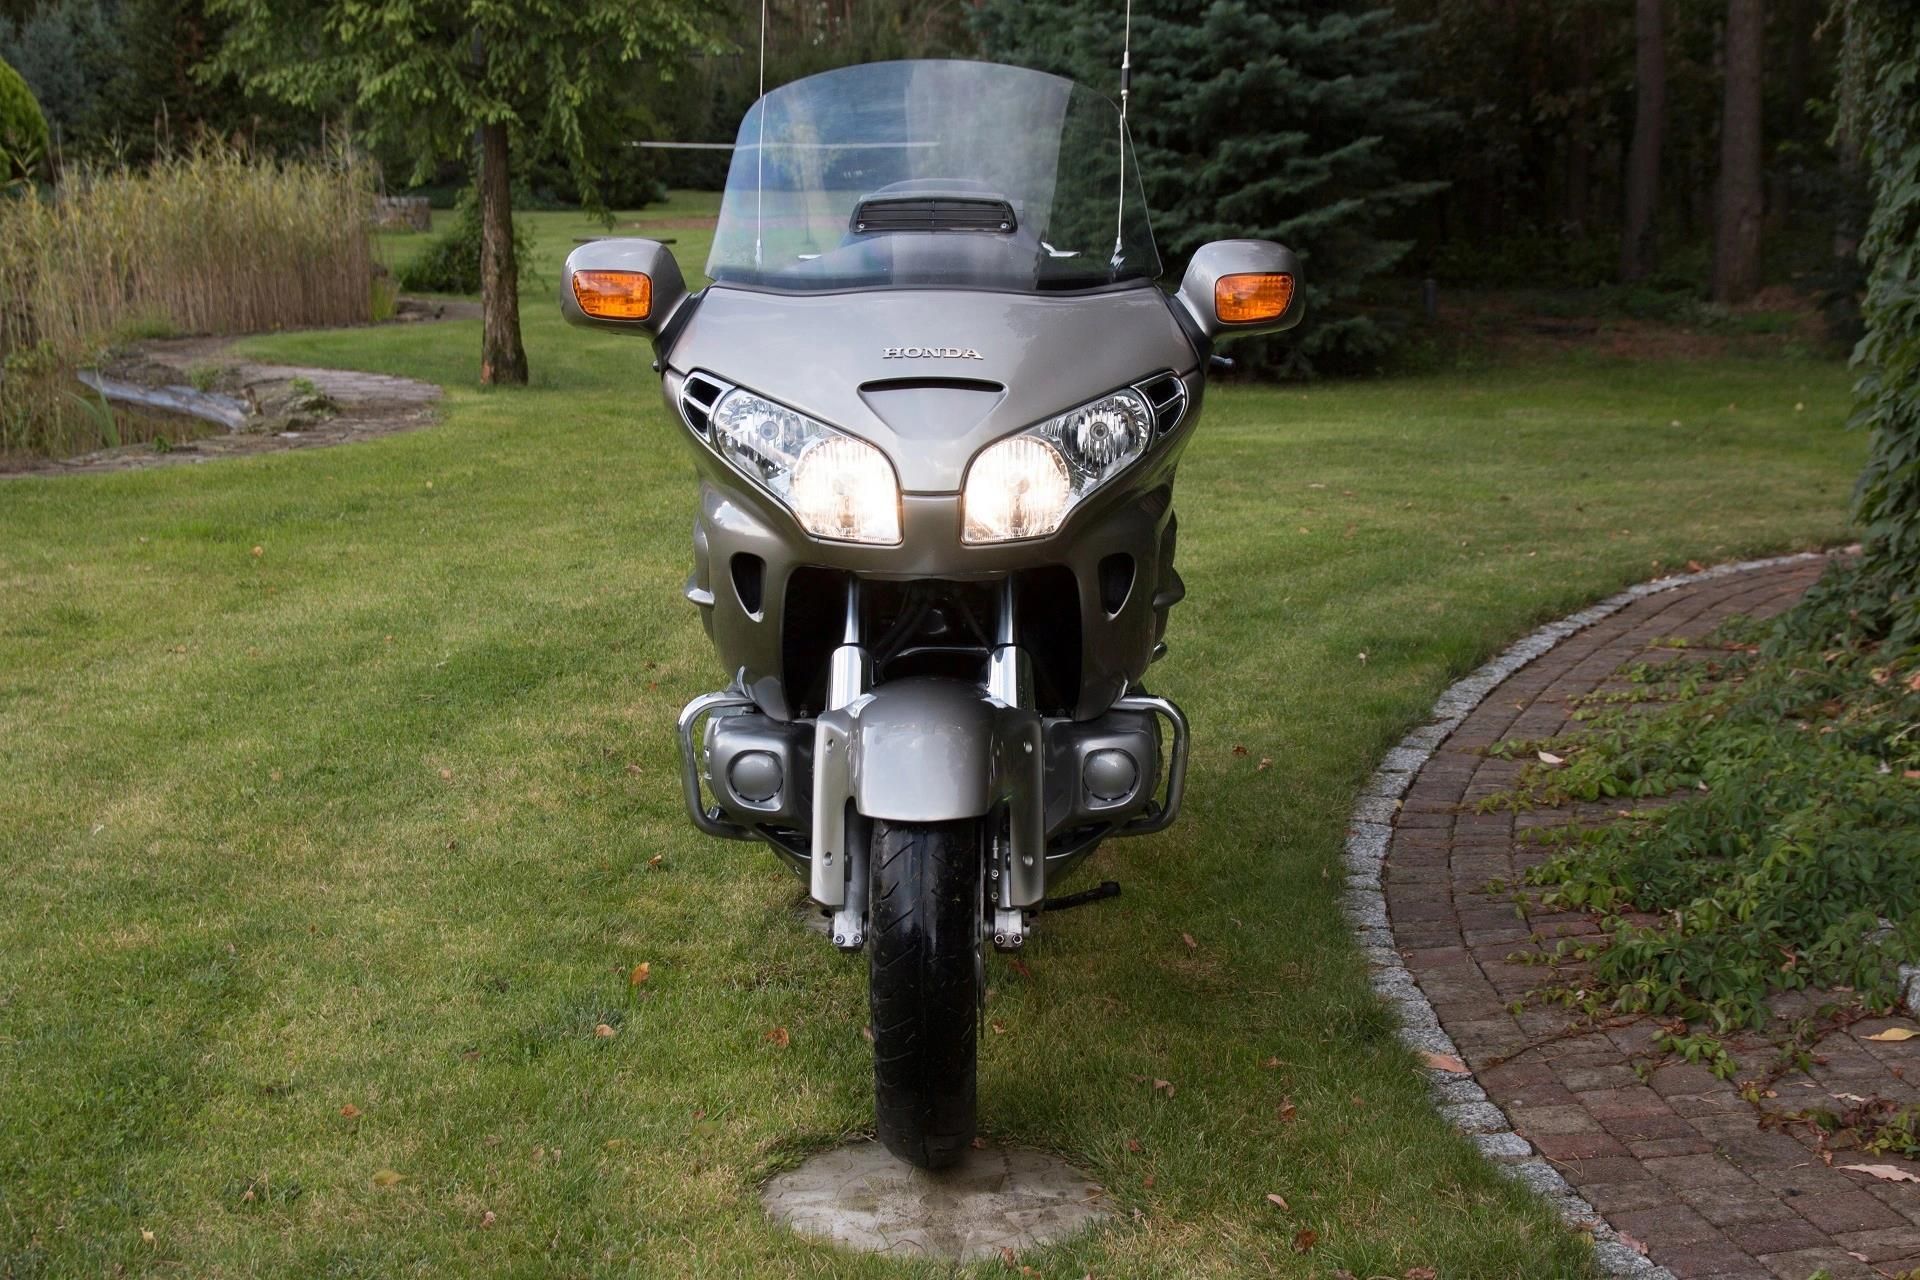 ABS CB 2003 Honda GL 1800 Goldwing Gold Wing Opinie i